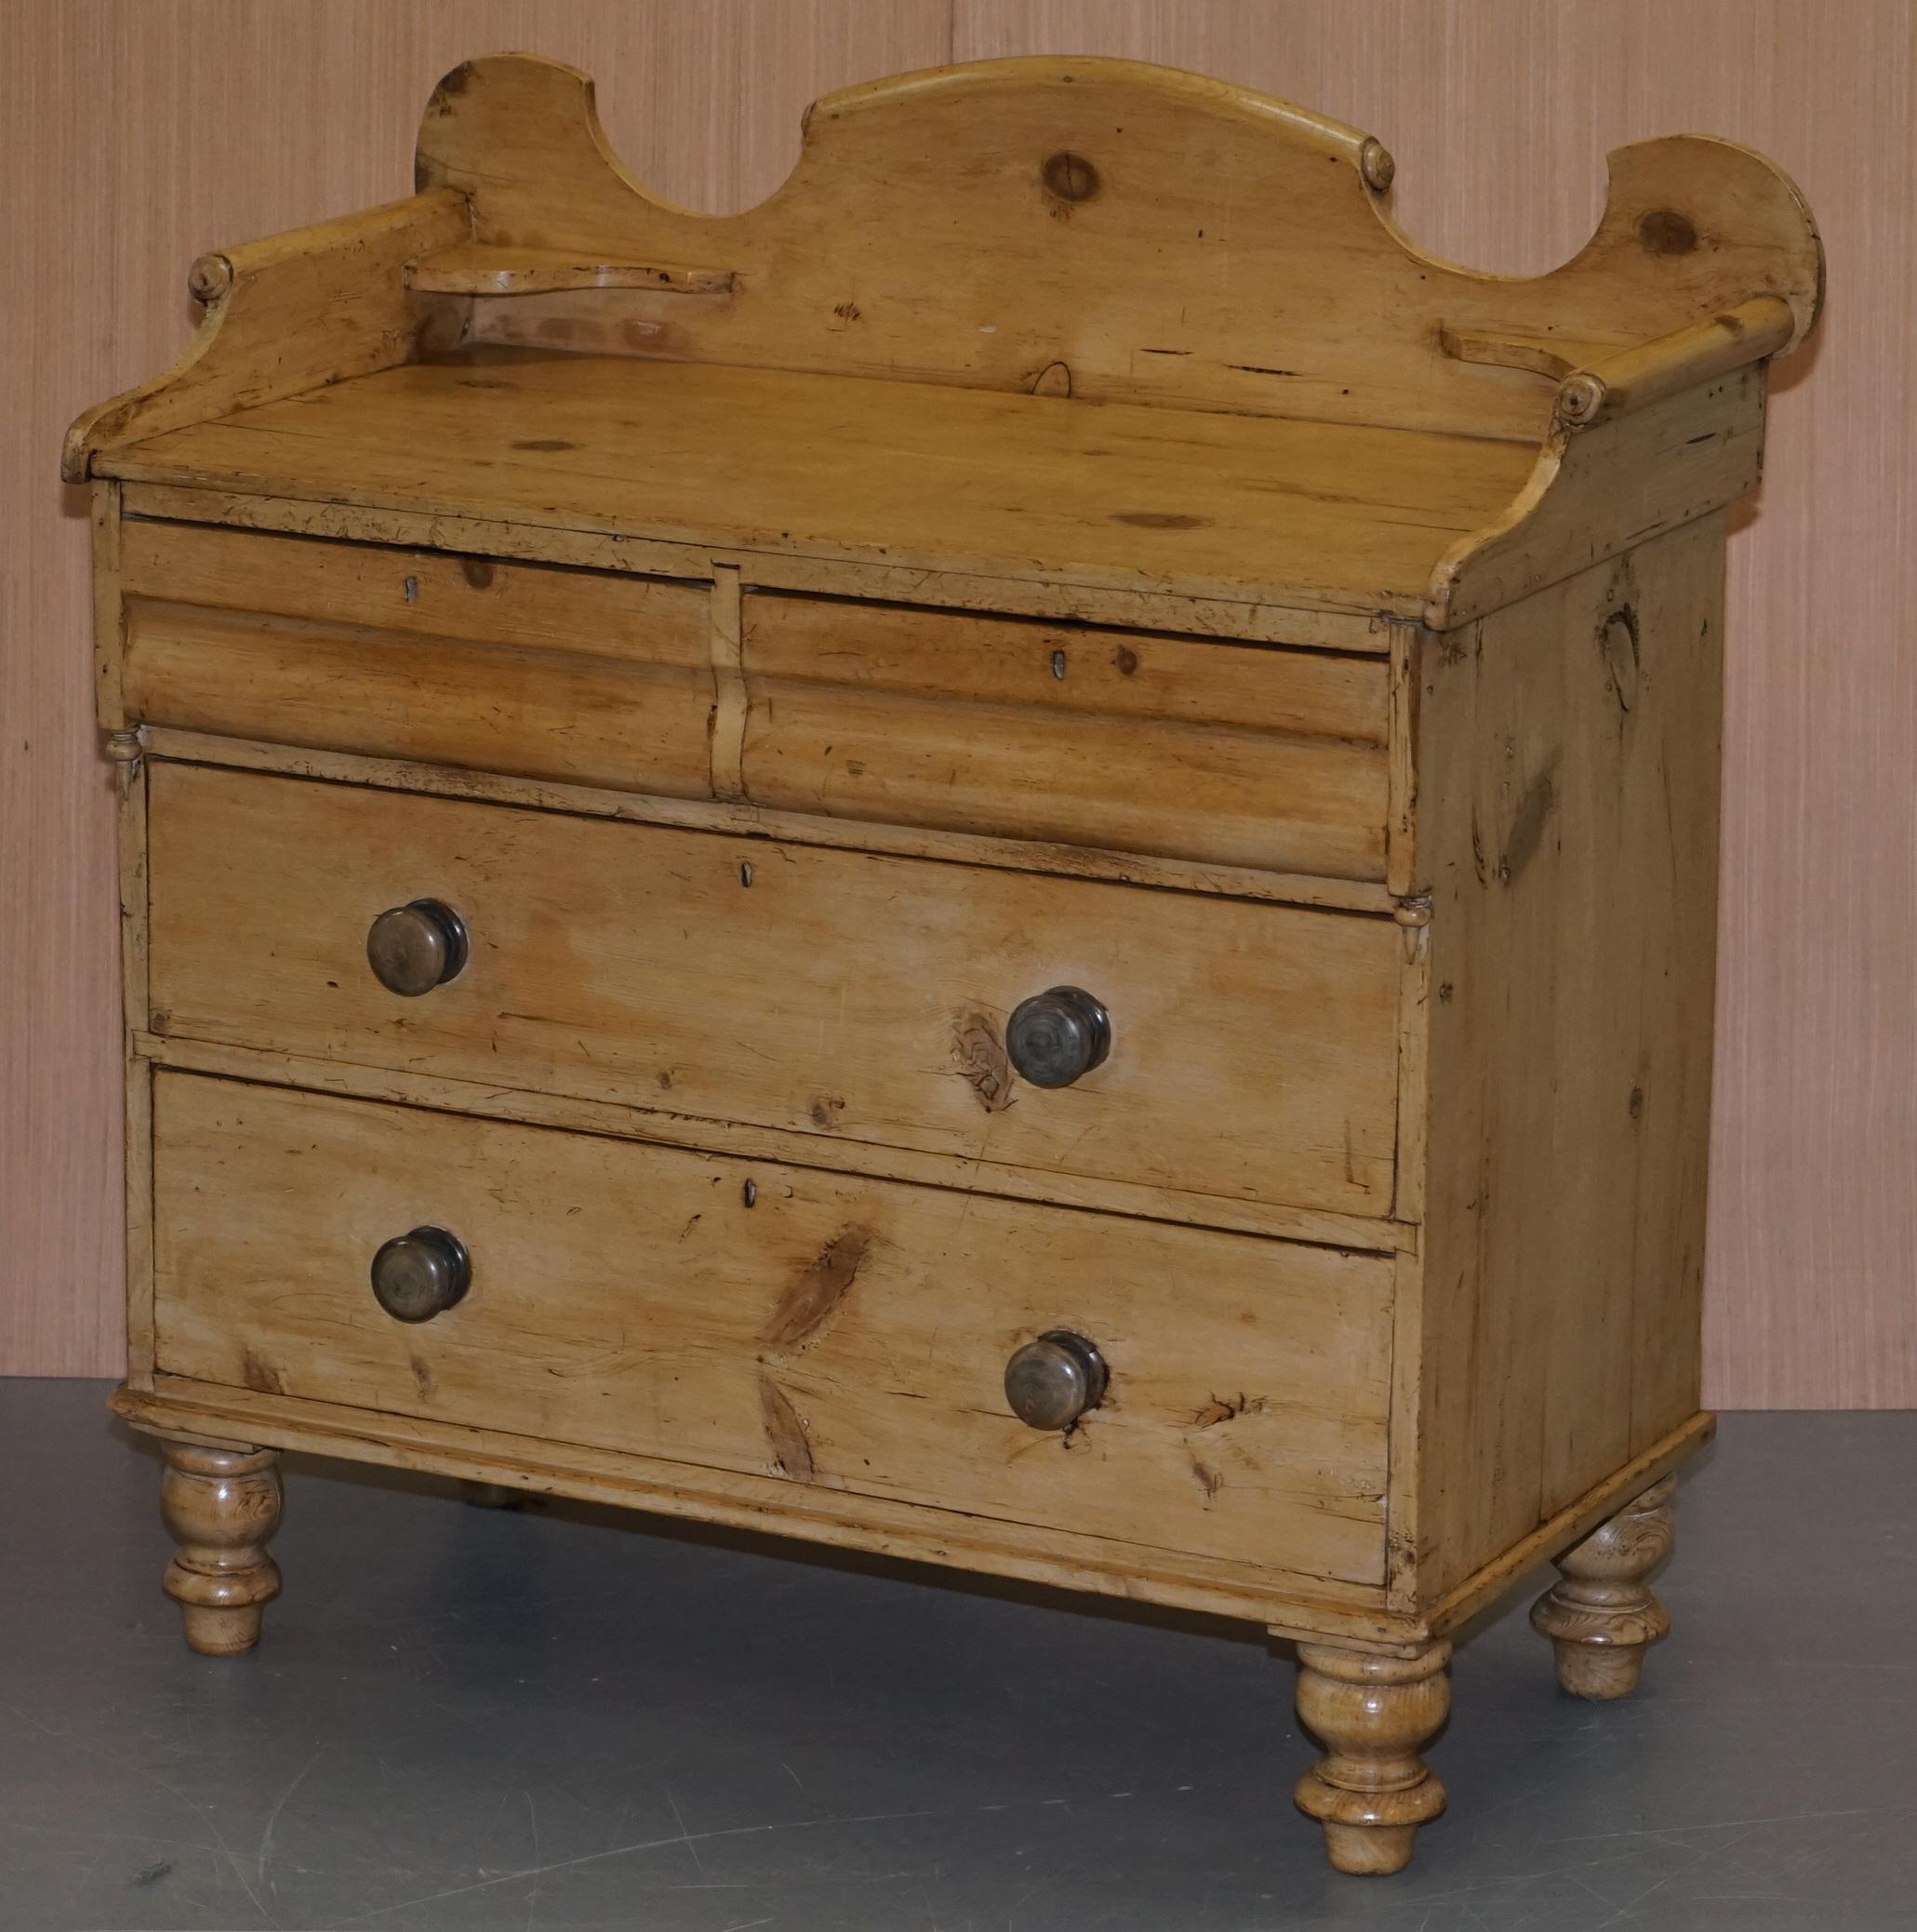 washstand with drawers